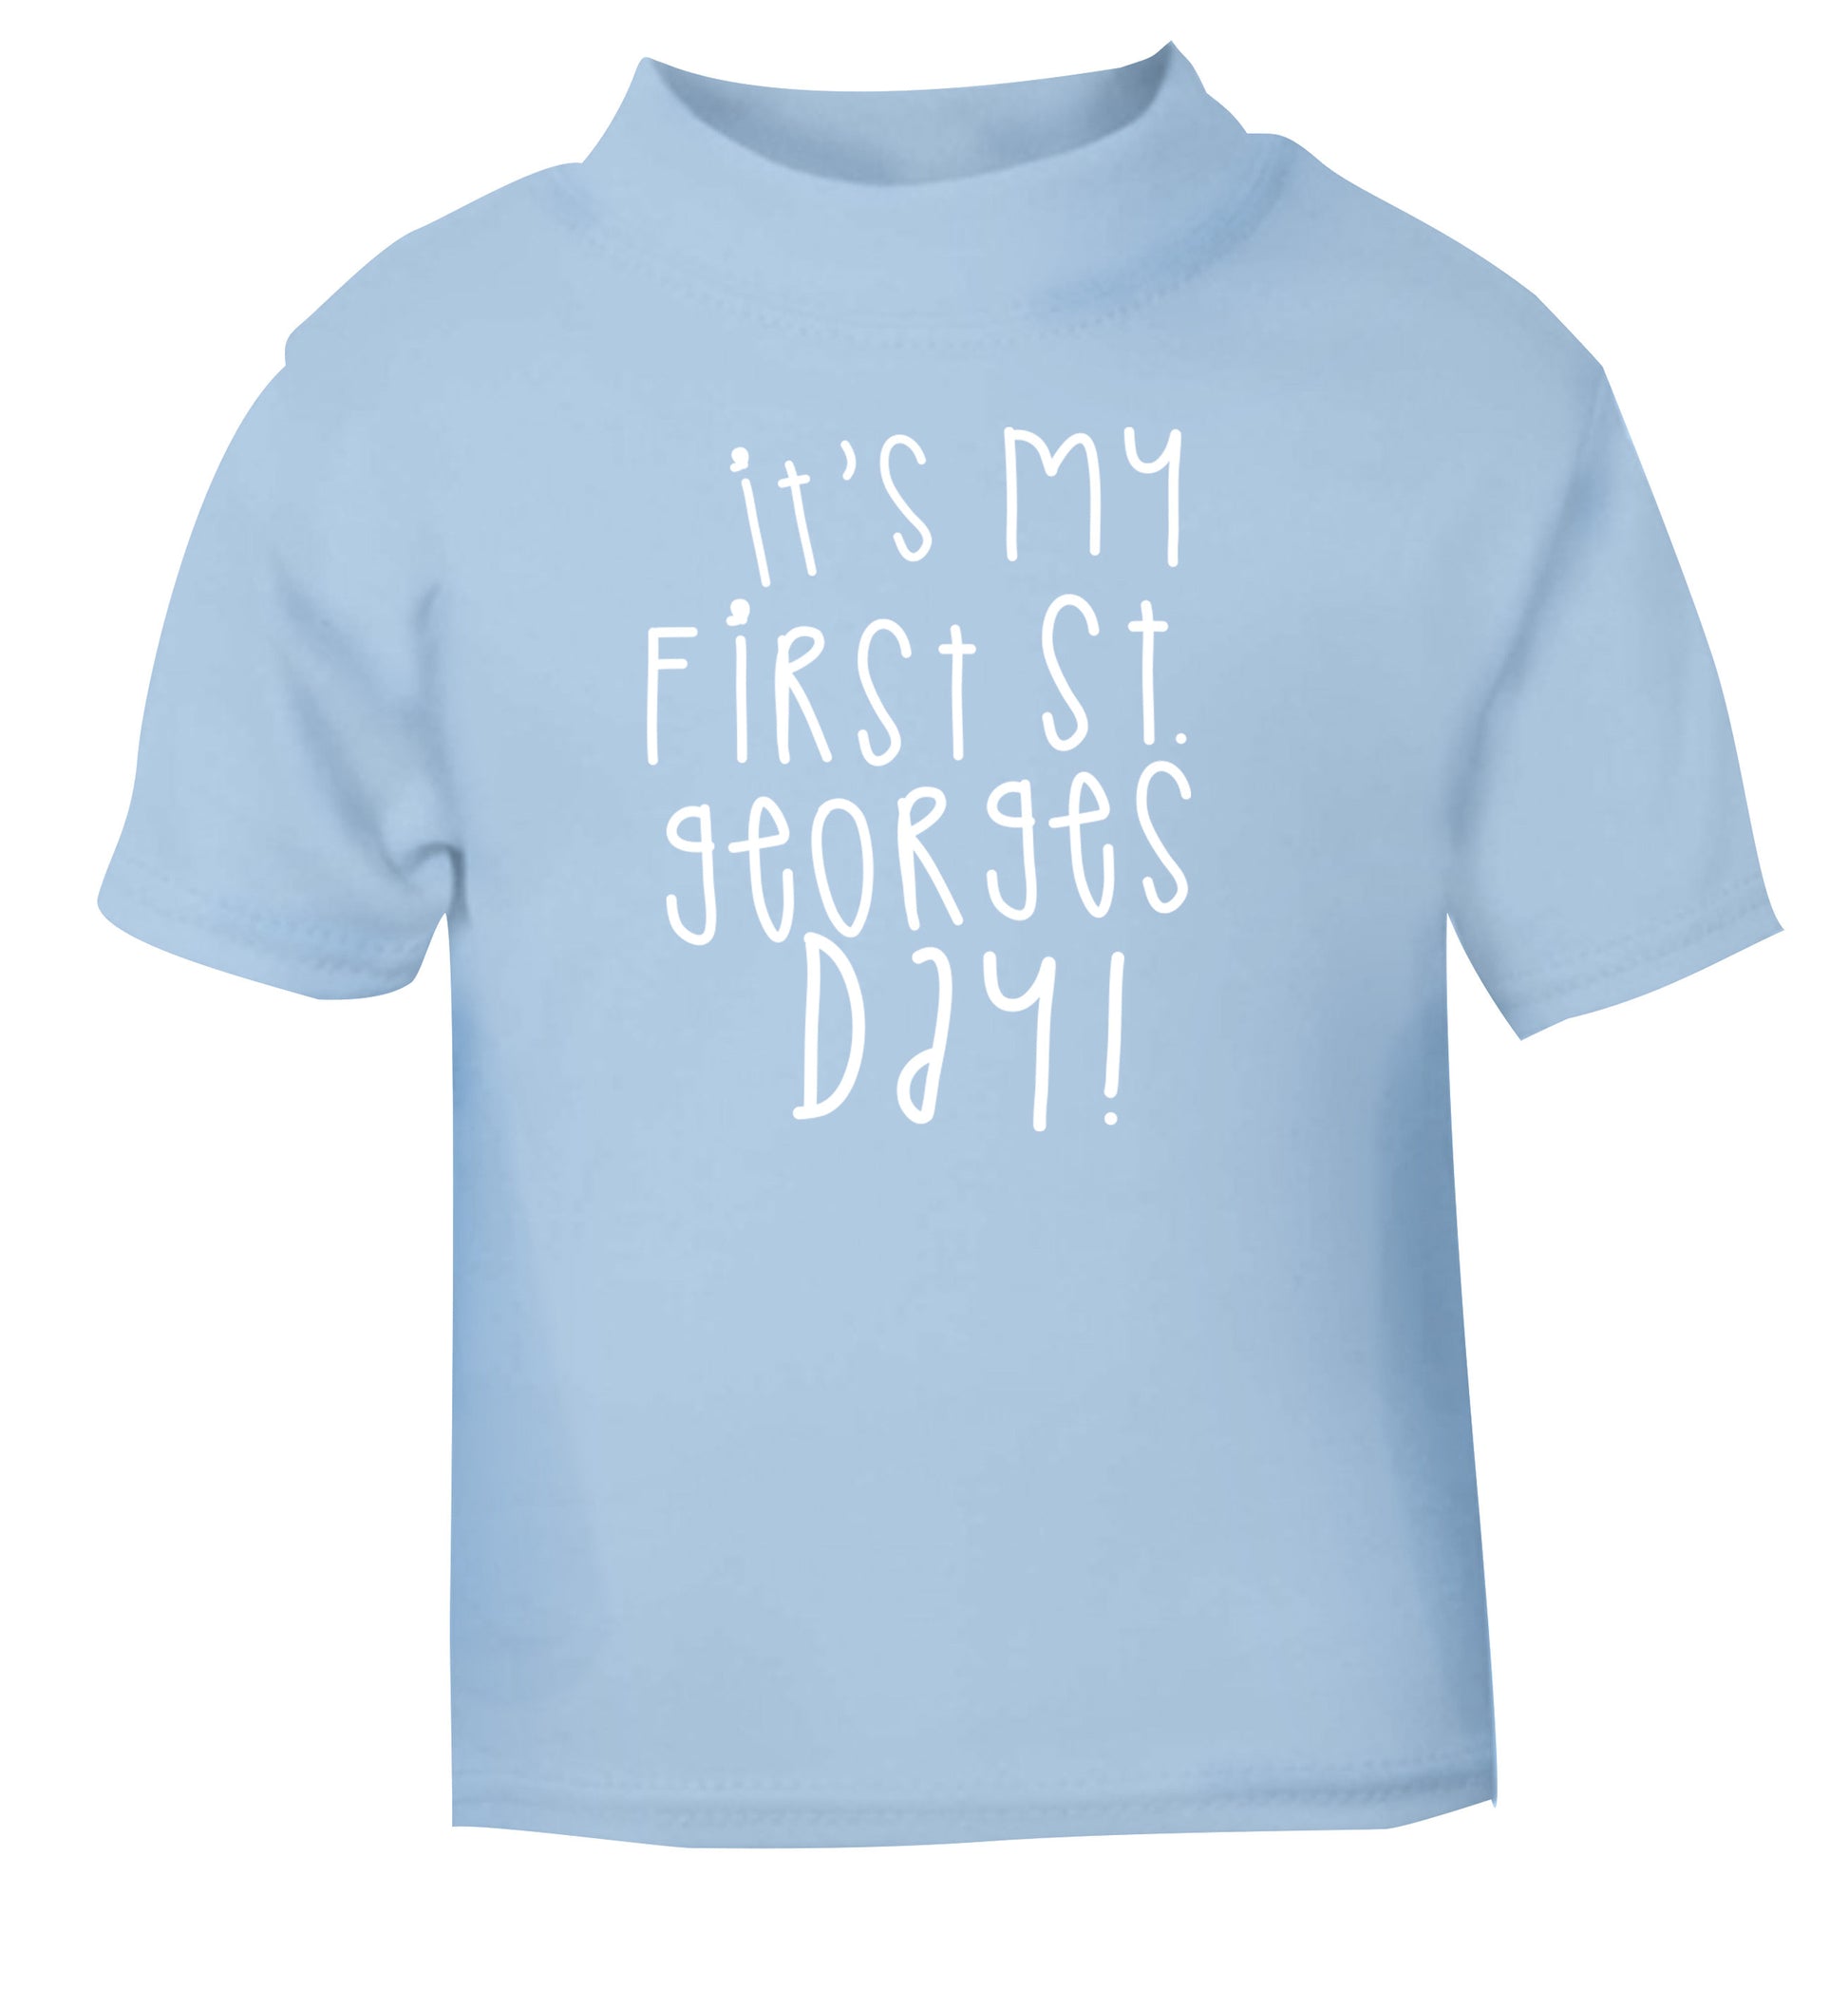 It's my first St Georges day light blue Baby Toddler Tshirt 2 Years